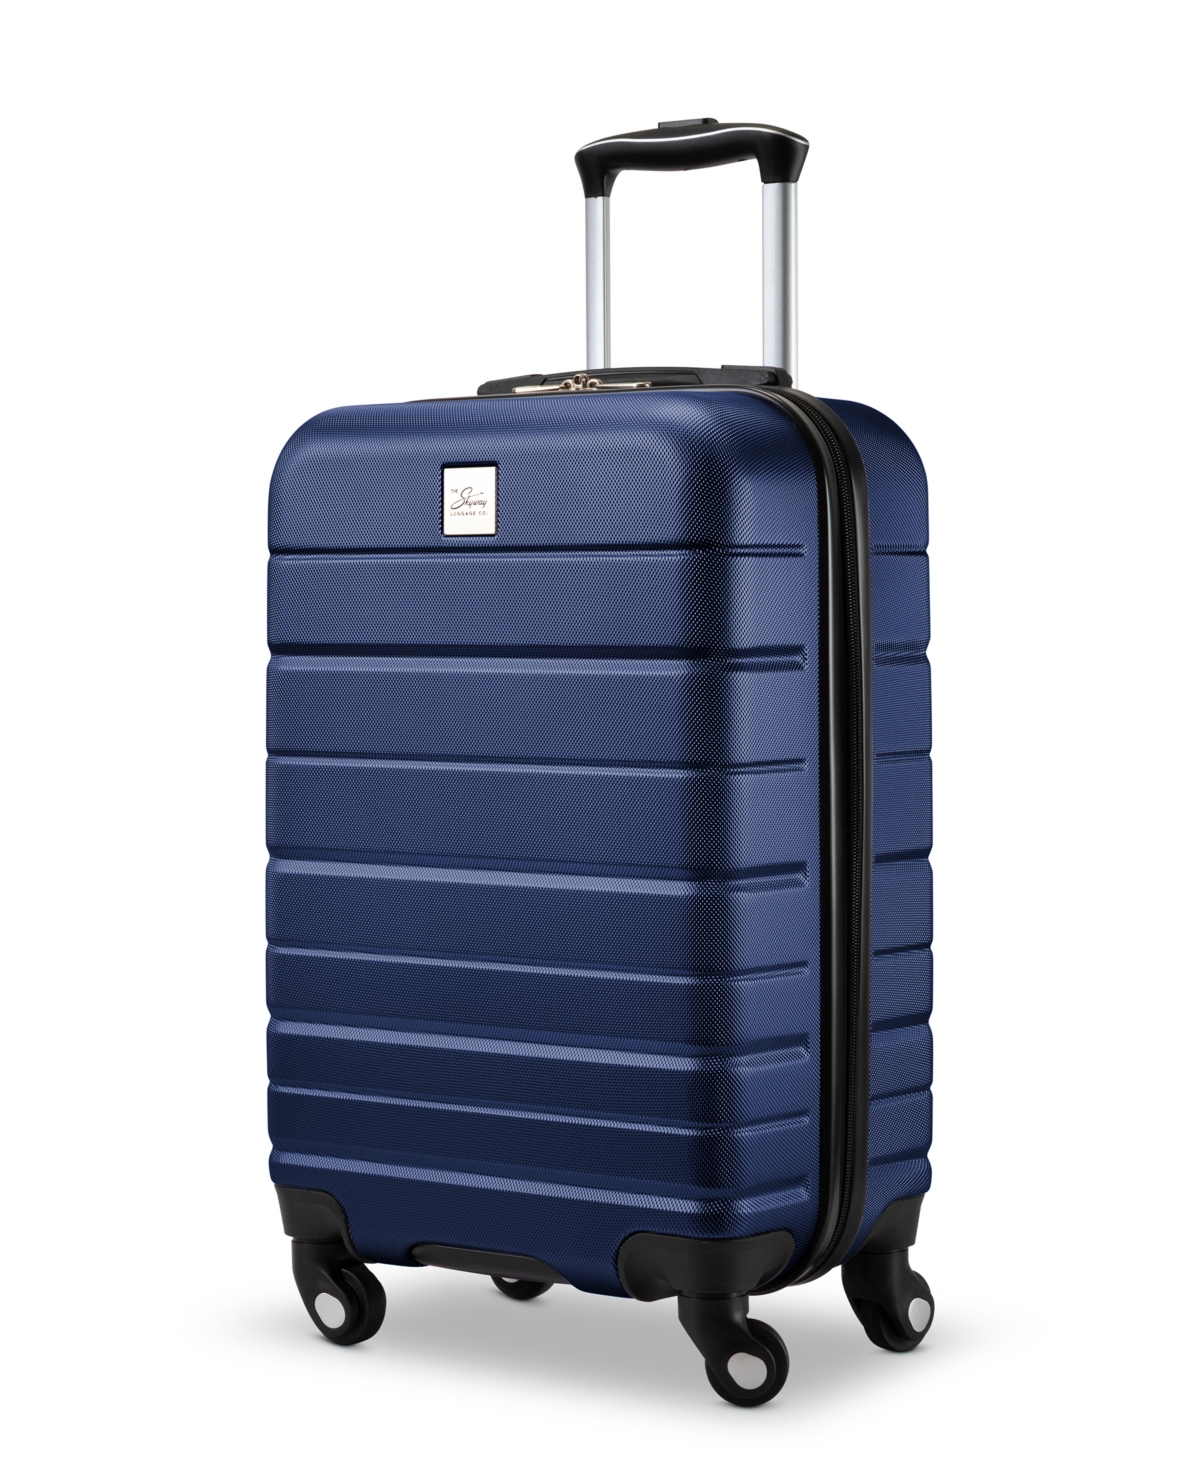 Epic 2.0 Hardside Carry-On Spinner Suitcase, 20" - Thyme